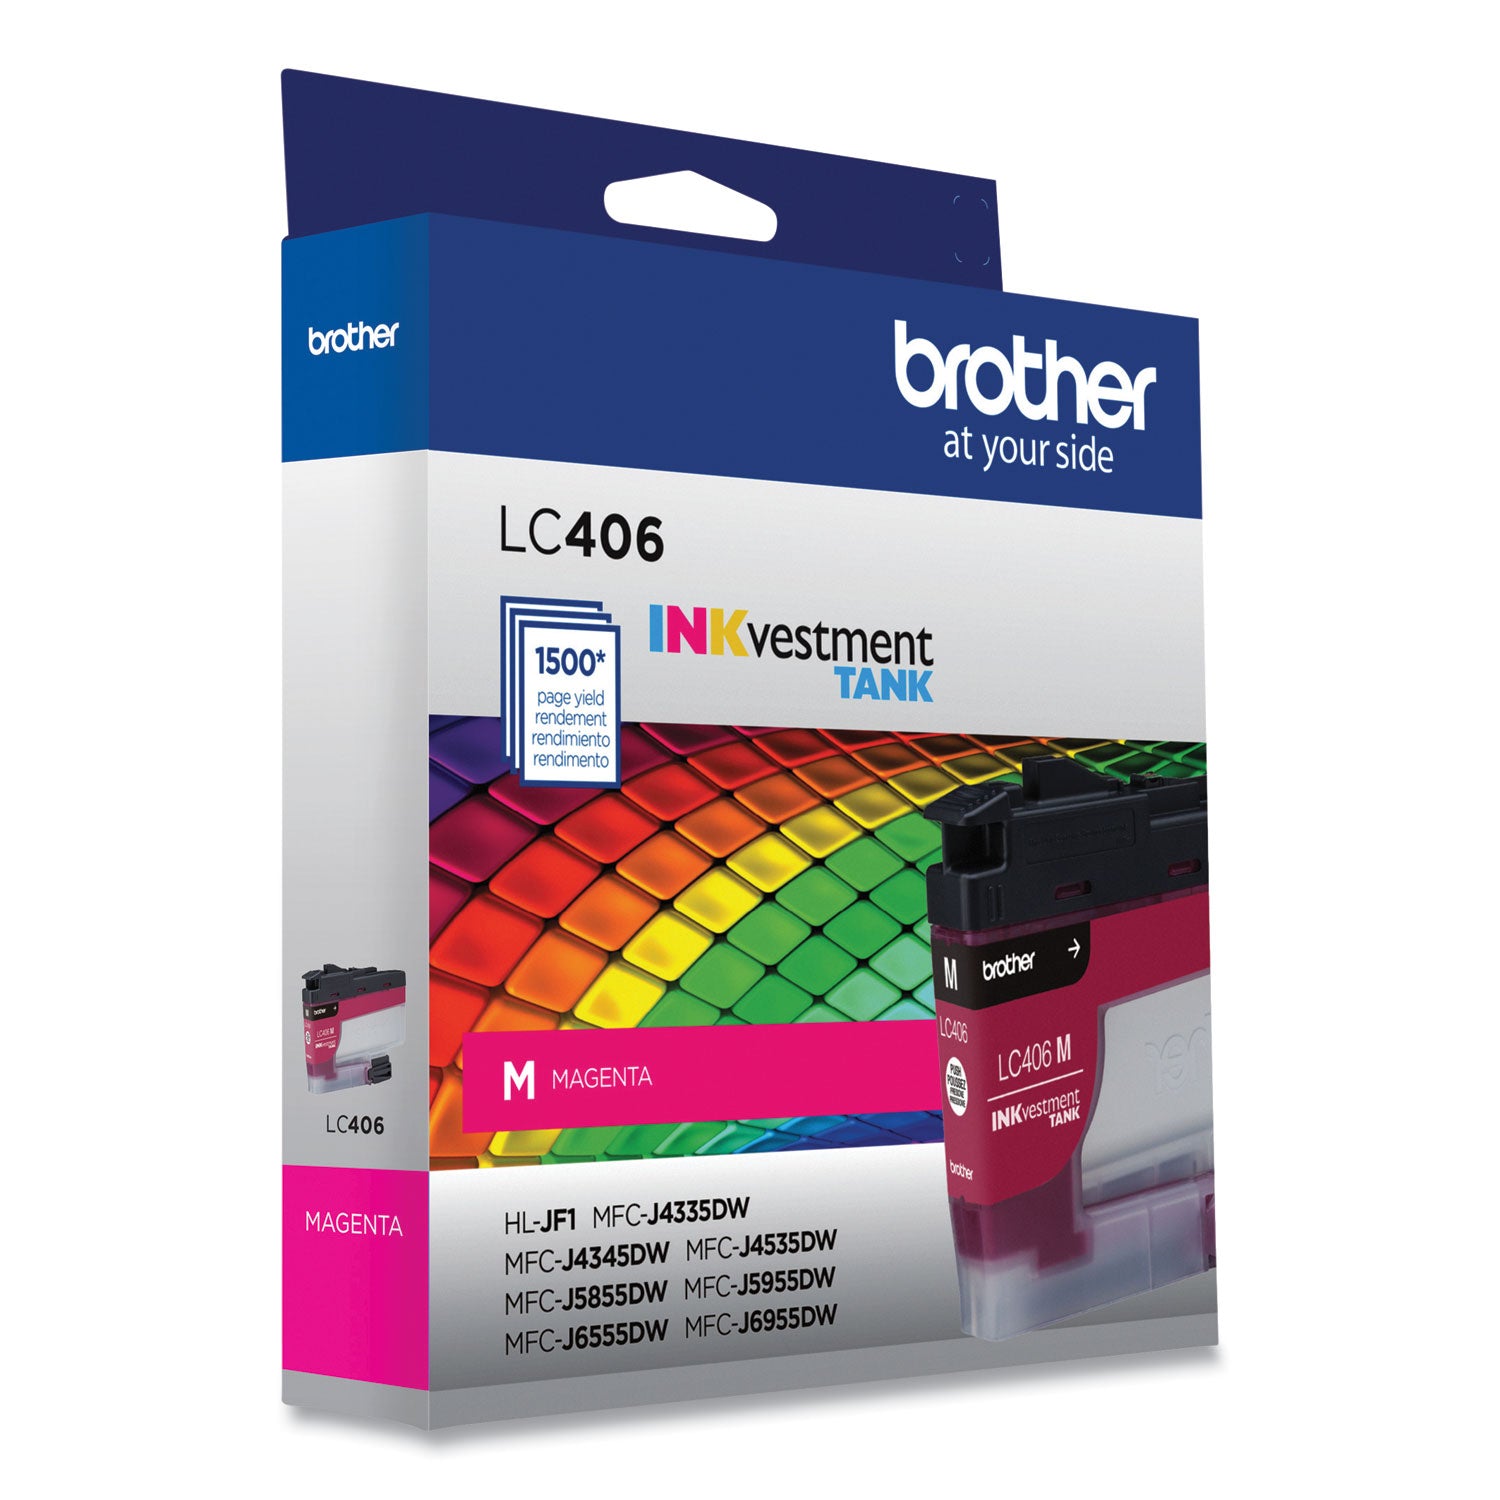 lc406ms-inkvestment-ink-1500-page-yield-magenta_brtlc406ms - 3